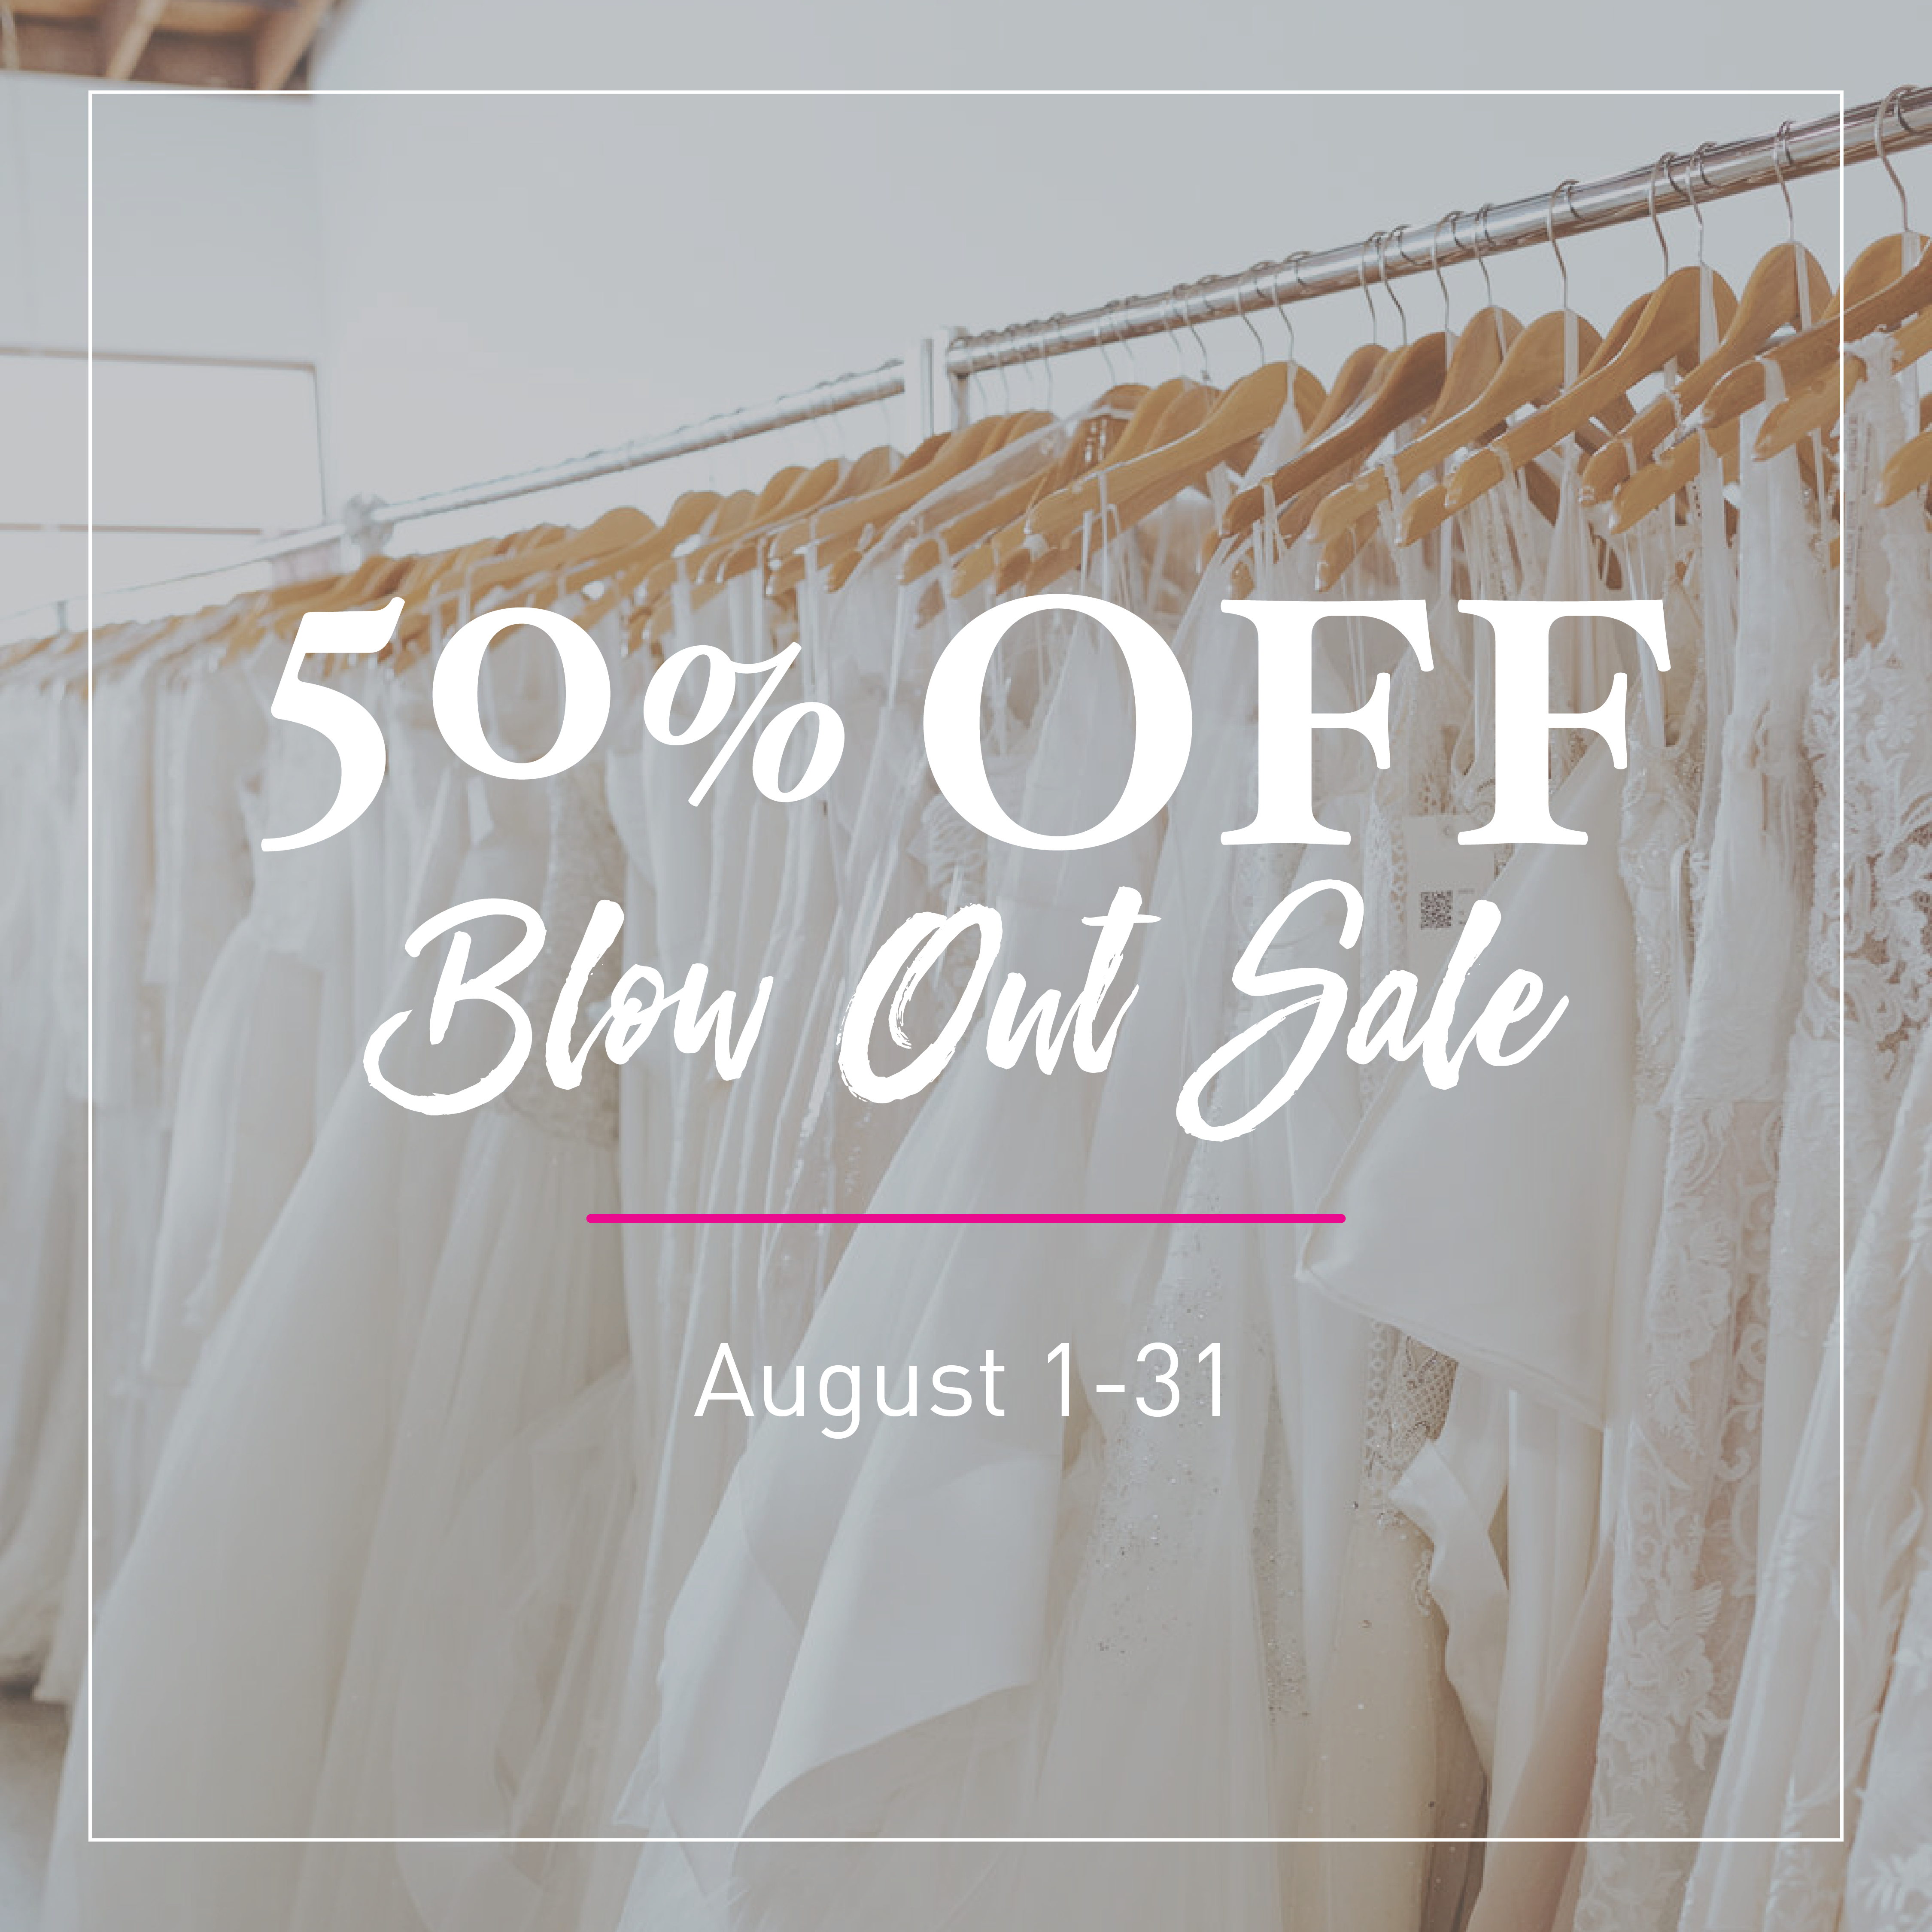 50% Off Blow-Out Sale – August 1-31, 2023 – All Locations